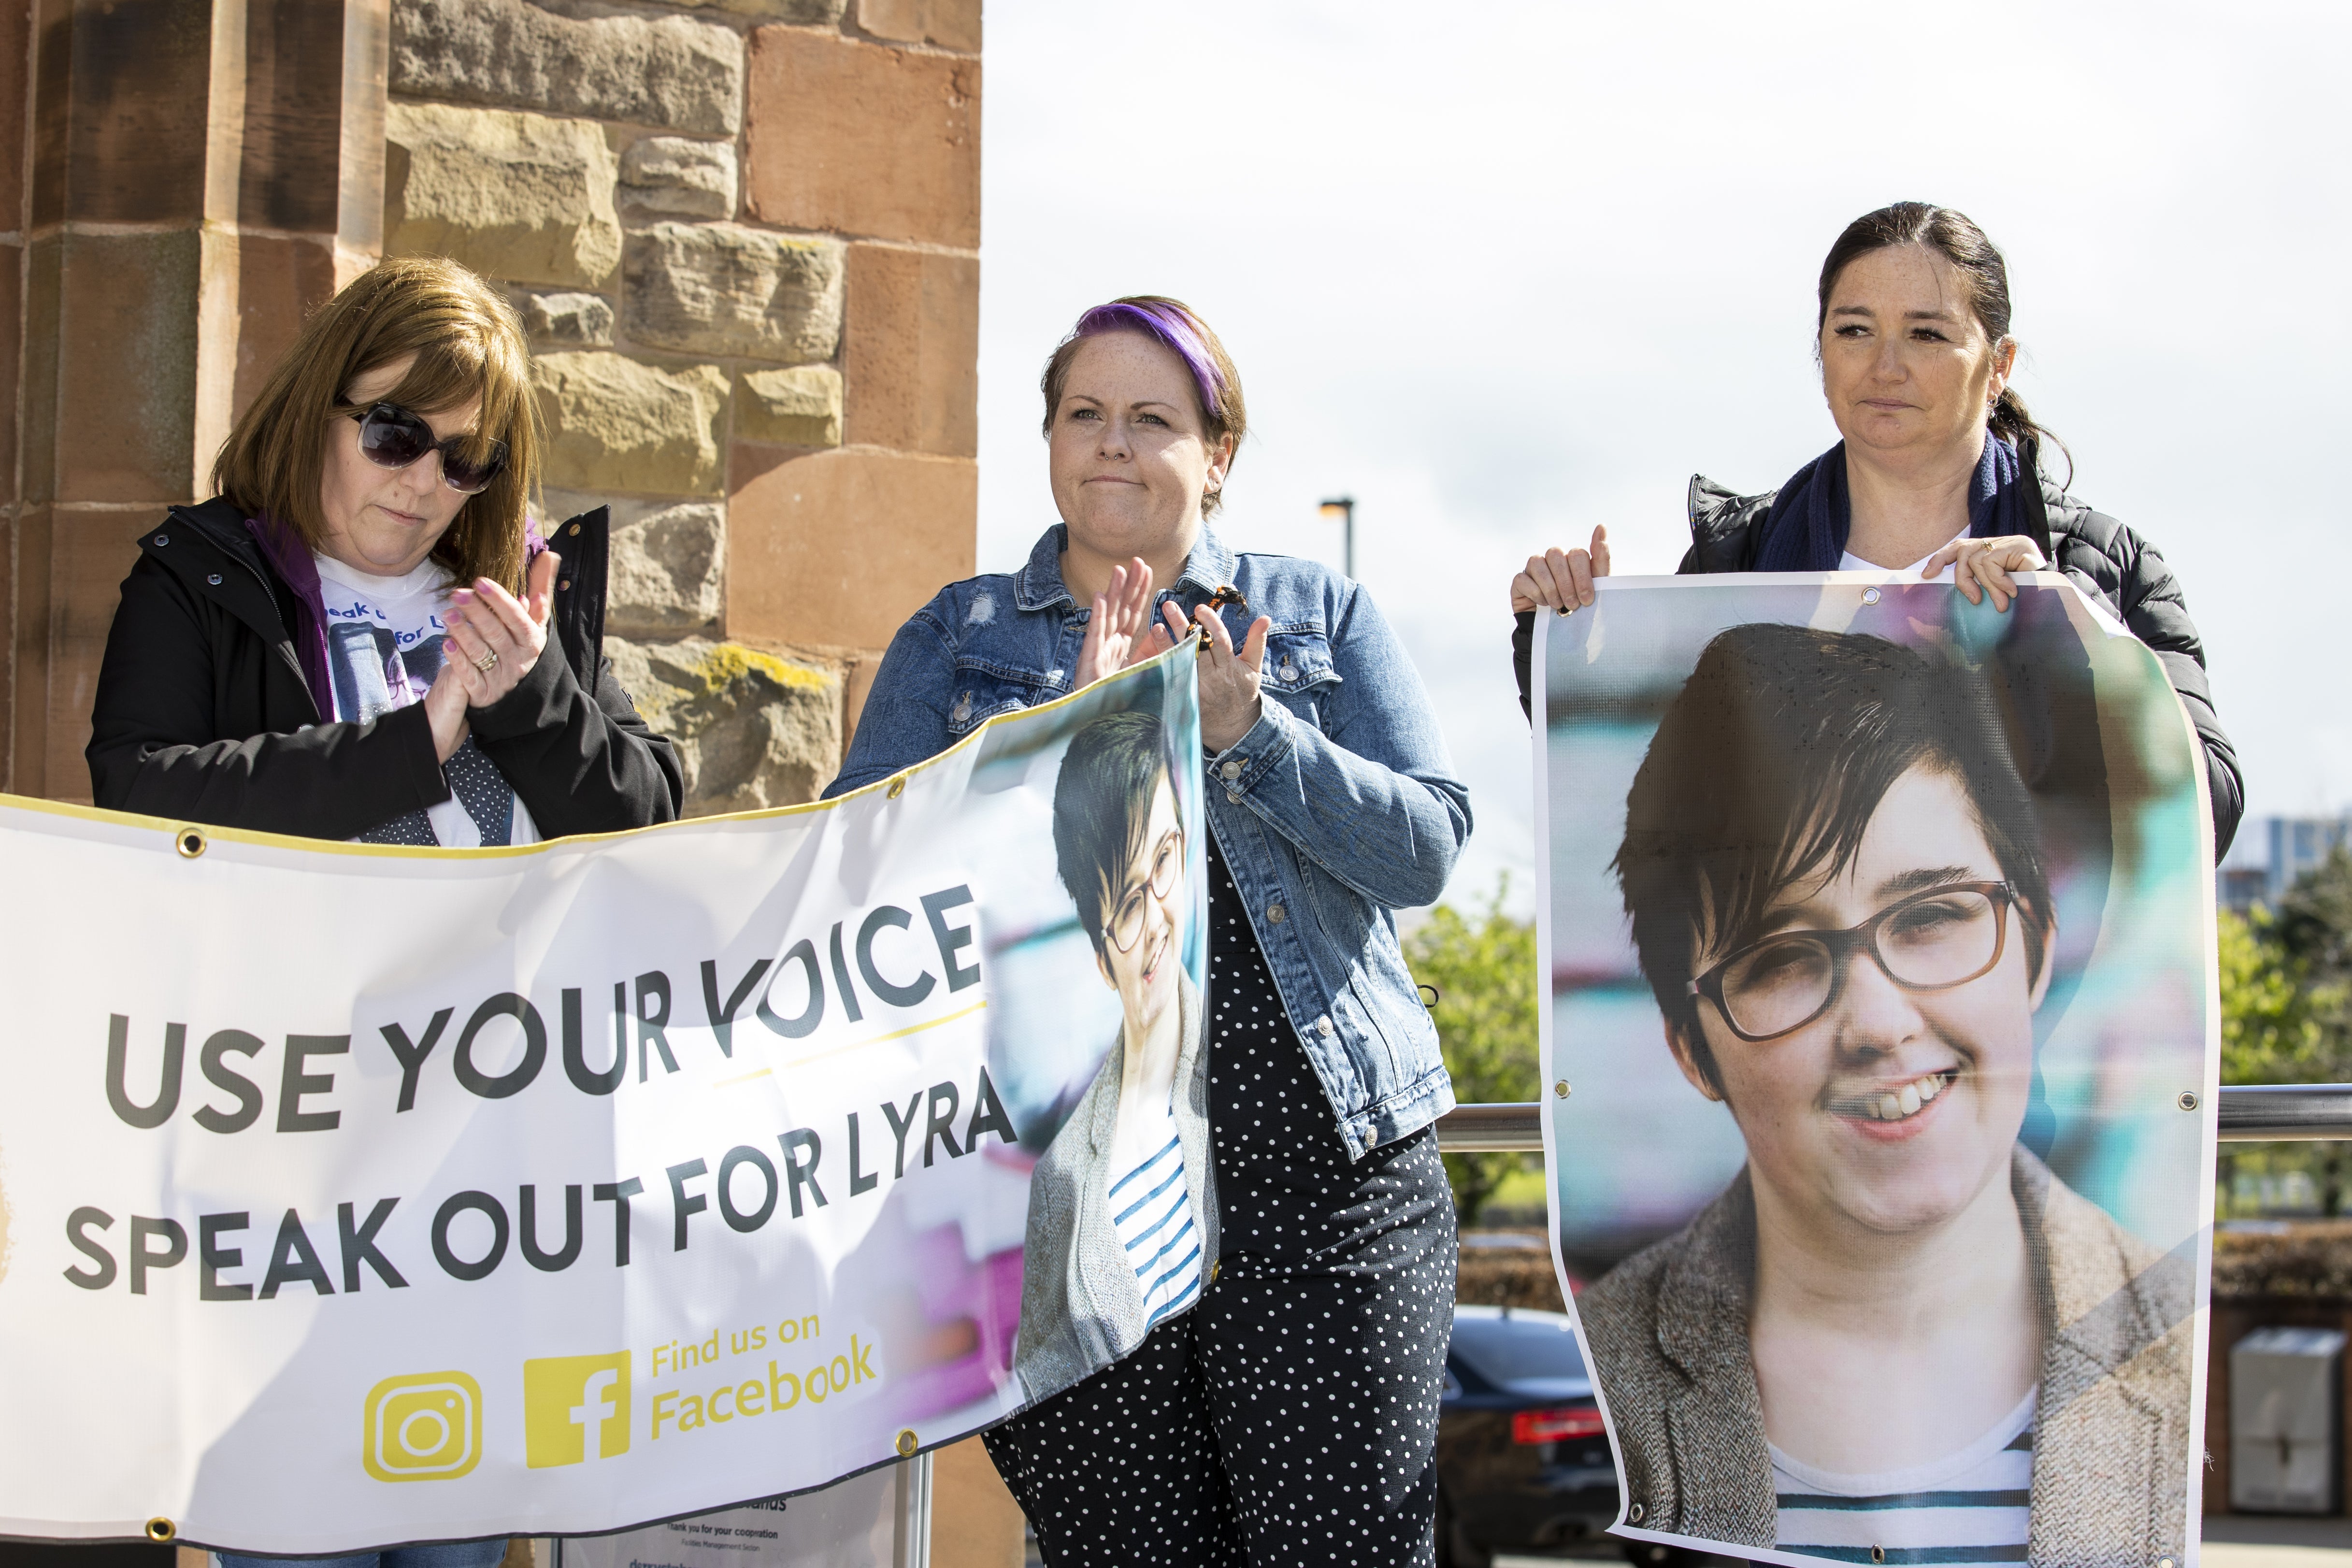 Lyra McKee’s sisters’ Nichola Corner (left) and Joan Hunter (right) stand with Ms McKee’s partner Sara Canning (centre) during a vigil attended by members of the National Union of Journalists (NUJ) at the Guildhall in Derry, to mark the third anniversary of Lyra McKee’s murder.